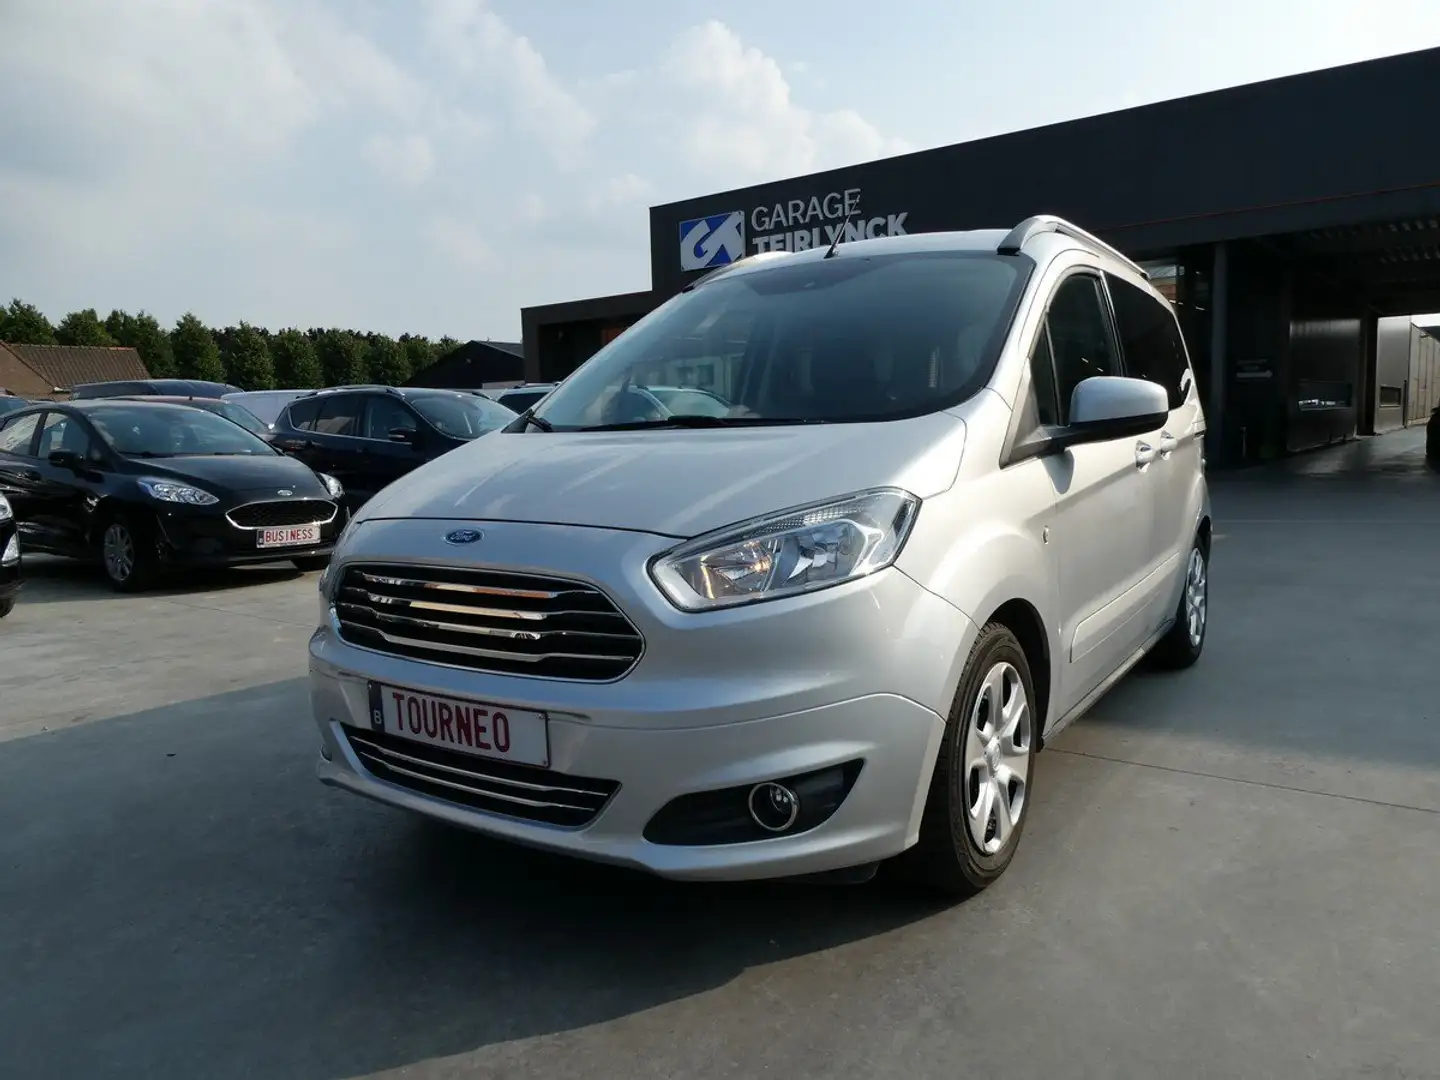 Ford Tourneo Courier 1.6 TDCi 95pk 5plaats LIMITED '15 73000km (36418) Argento - 1